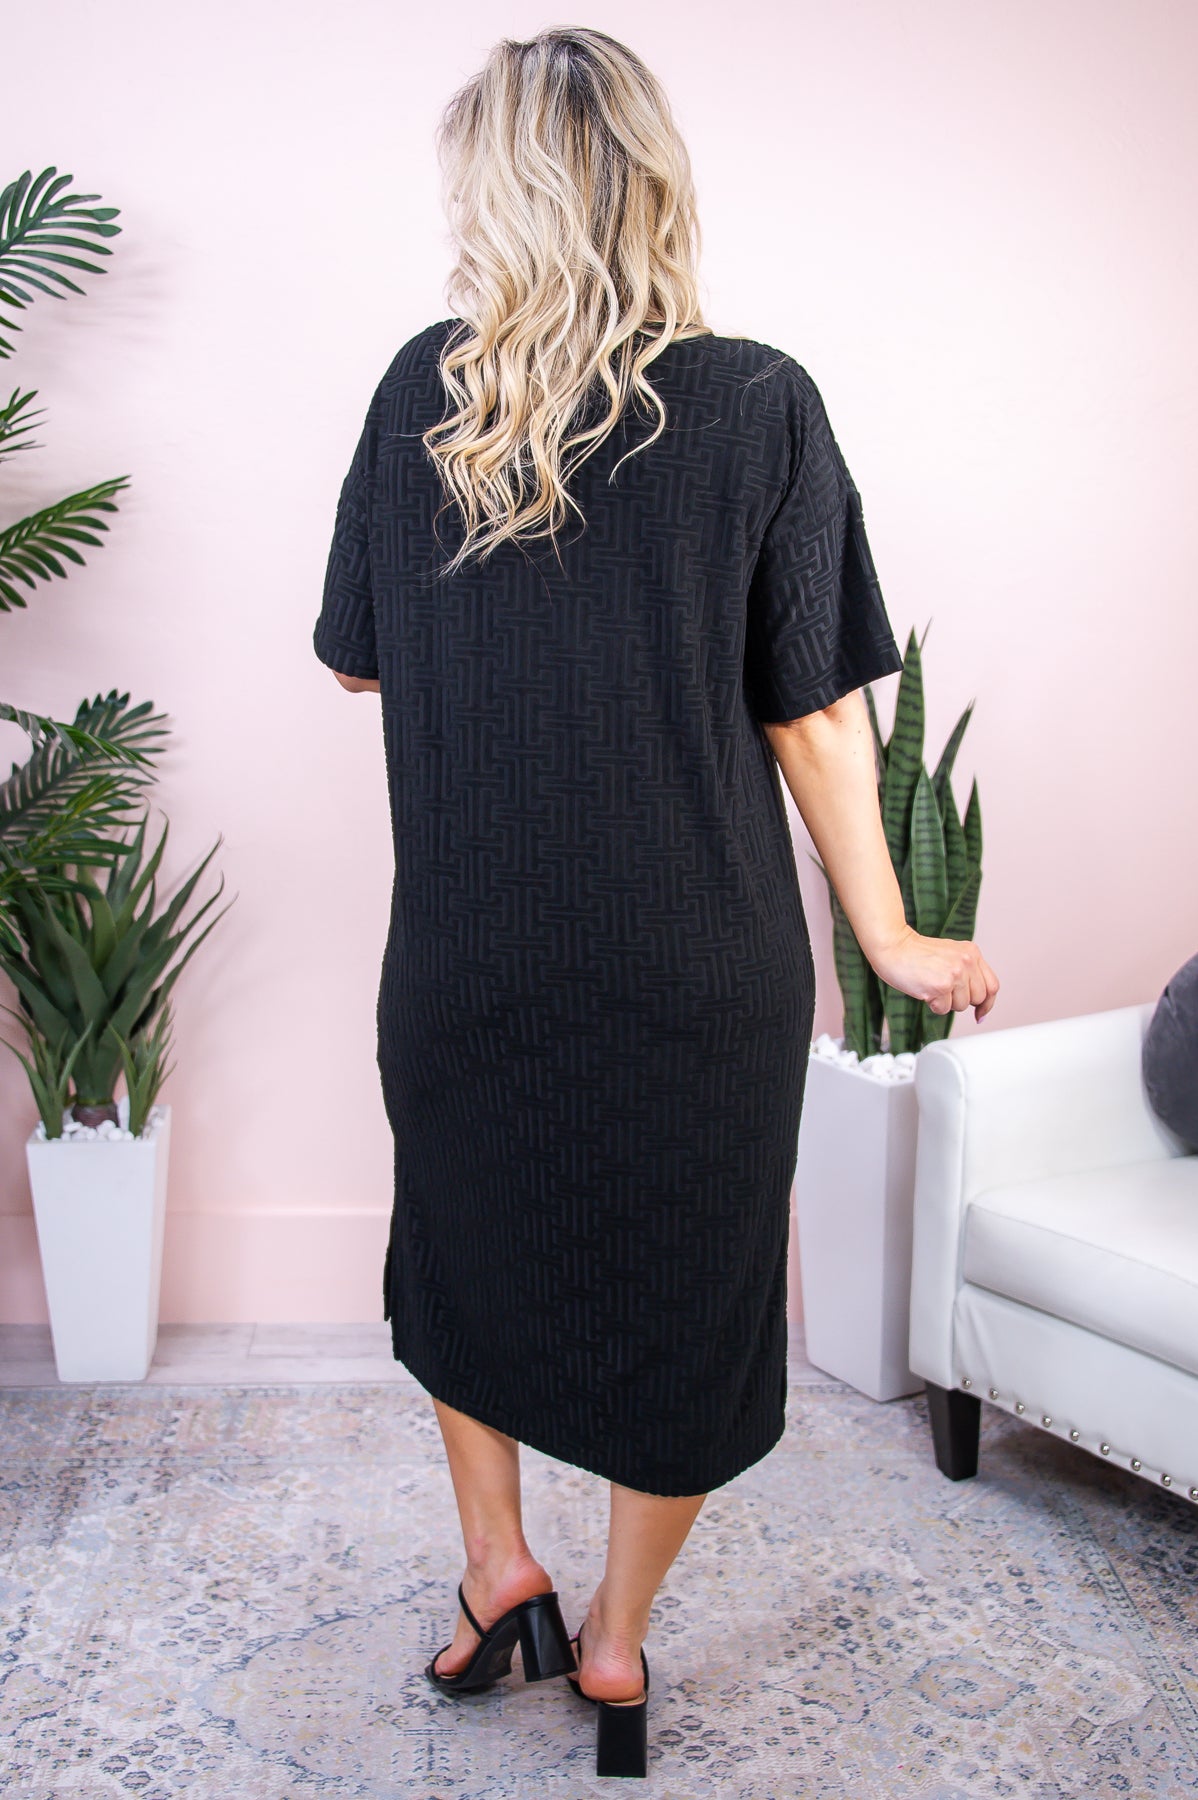 Upgrade Your Style Black Solid Dress - D5103BK